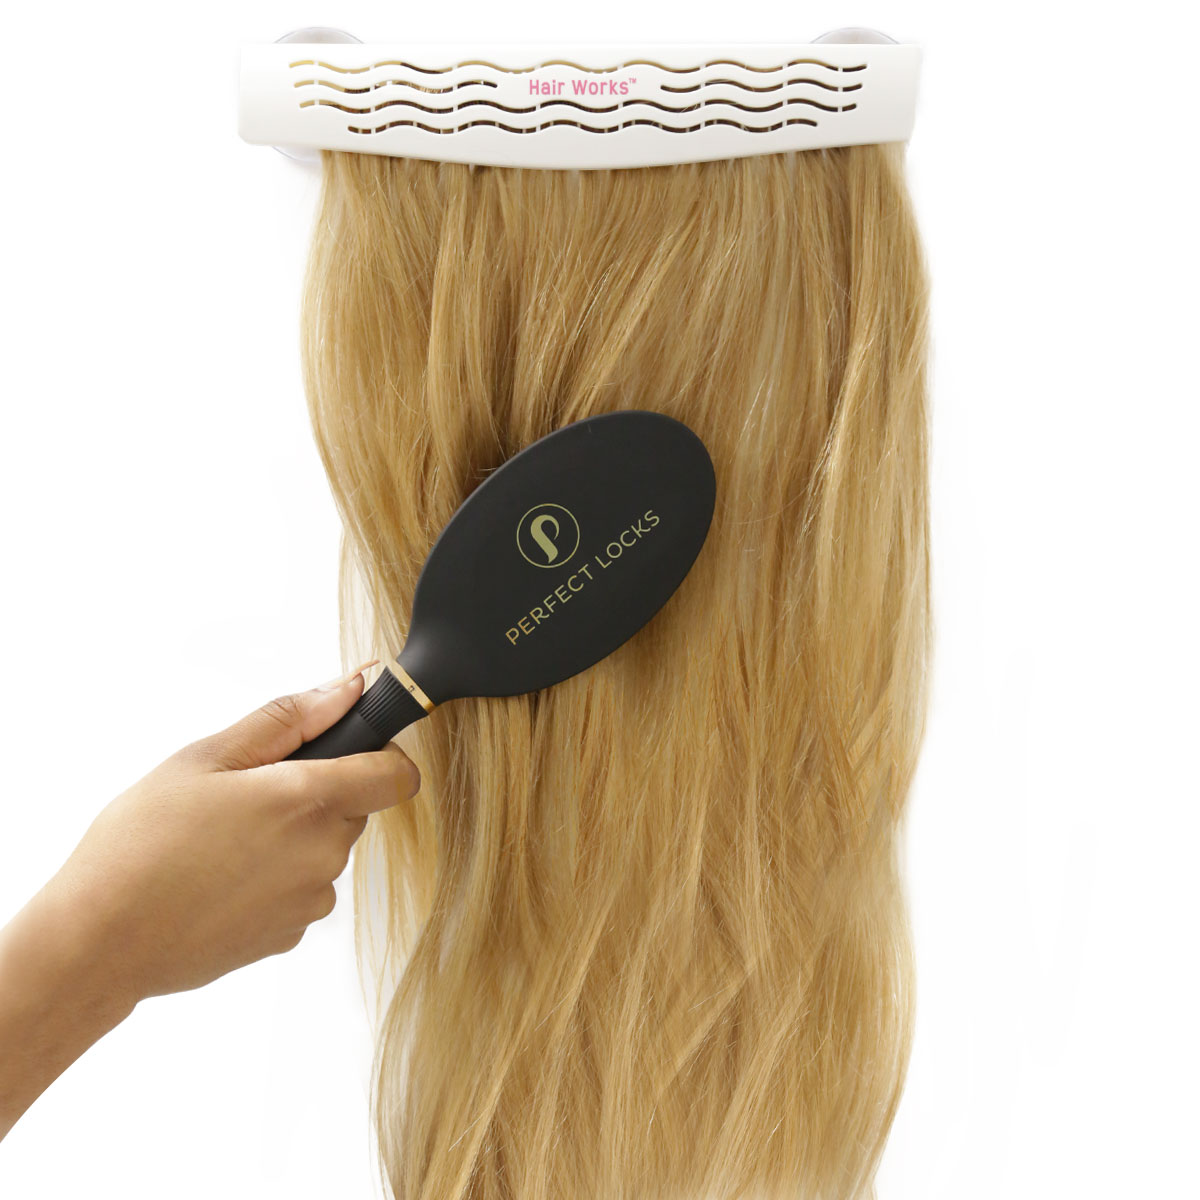 How to Wash Hair Extensions: A Step-by-Step Guide